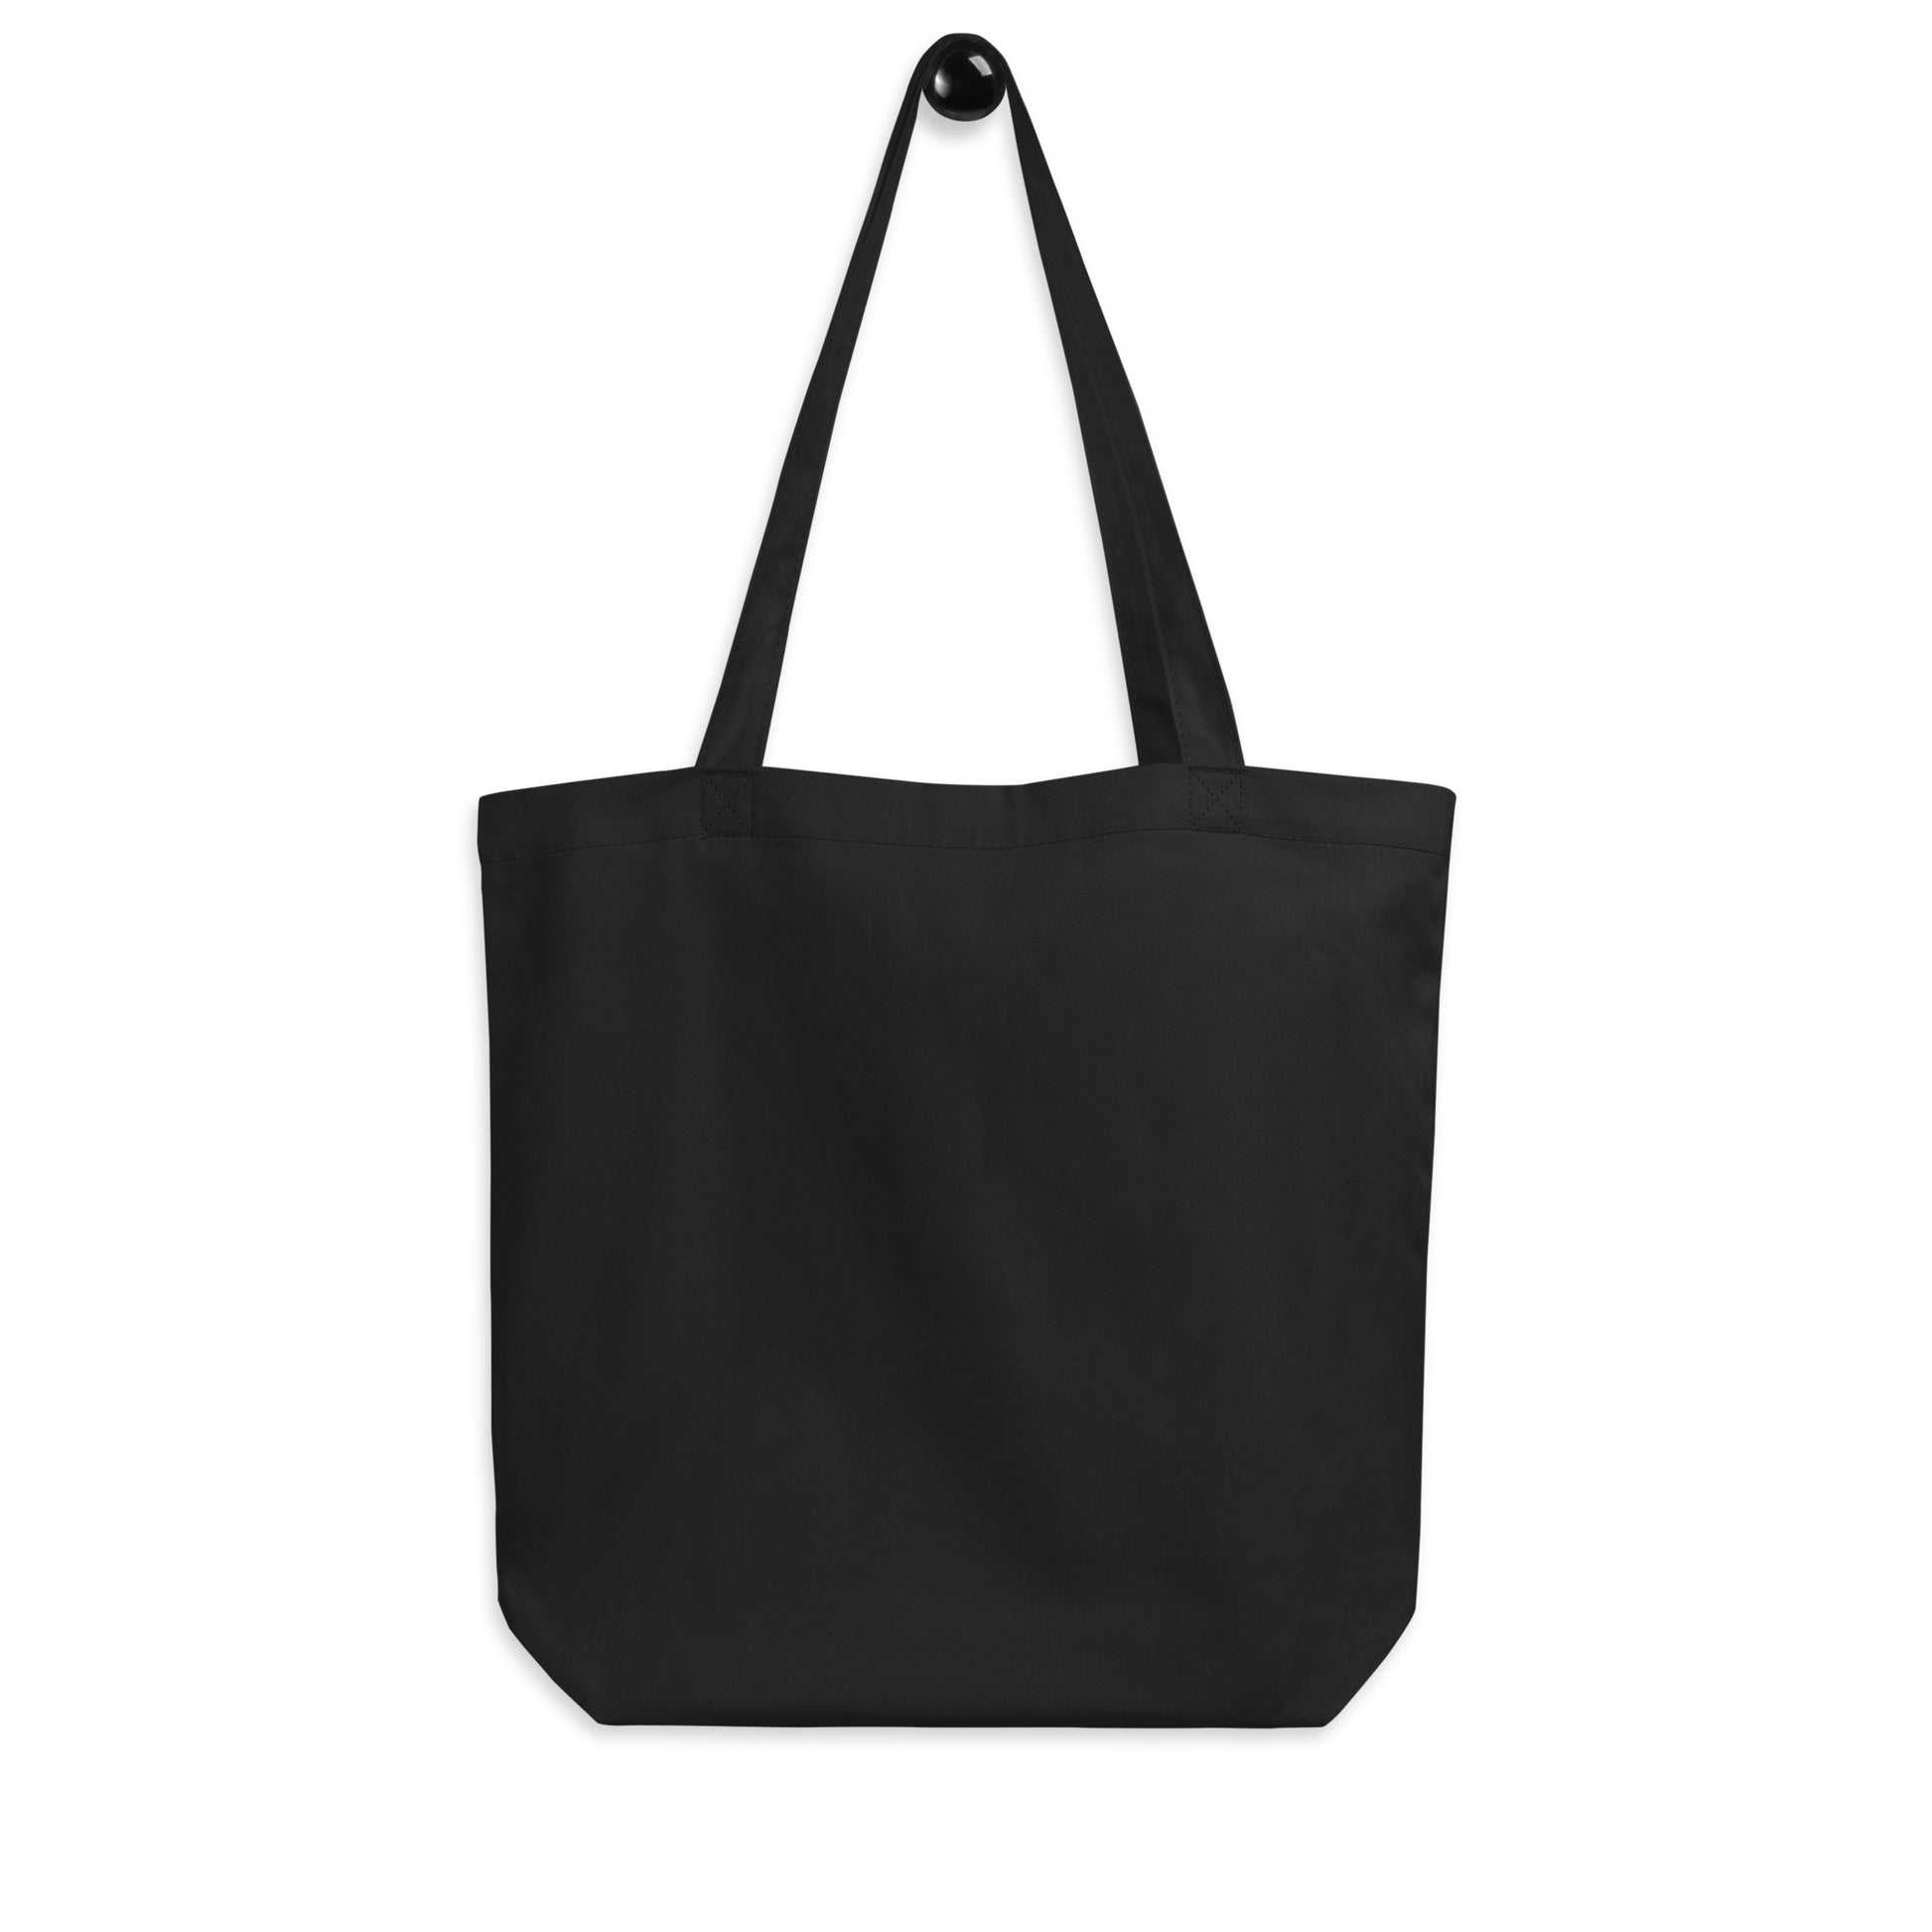 Unique Travel Gift Organic Tote - White Oval • EZE Buenos Aires • YHM Designs - Image 05